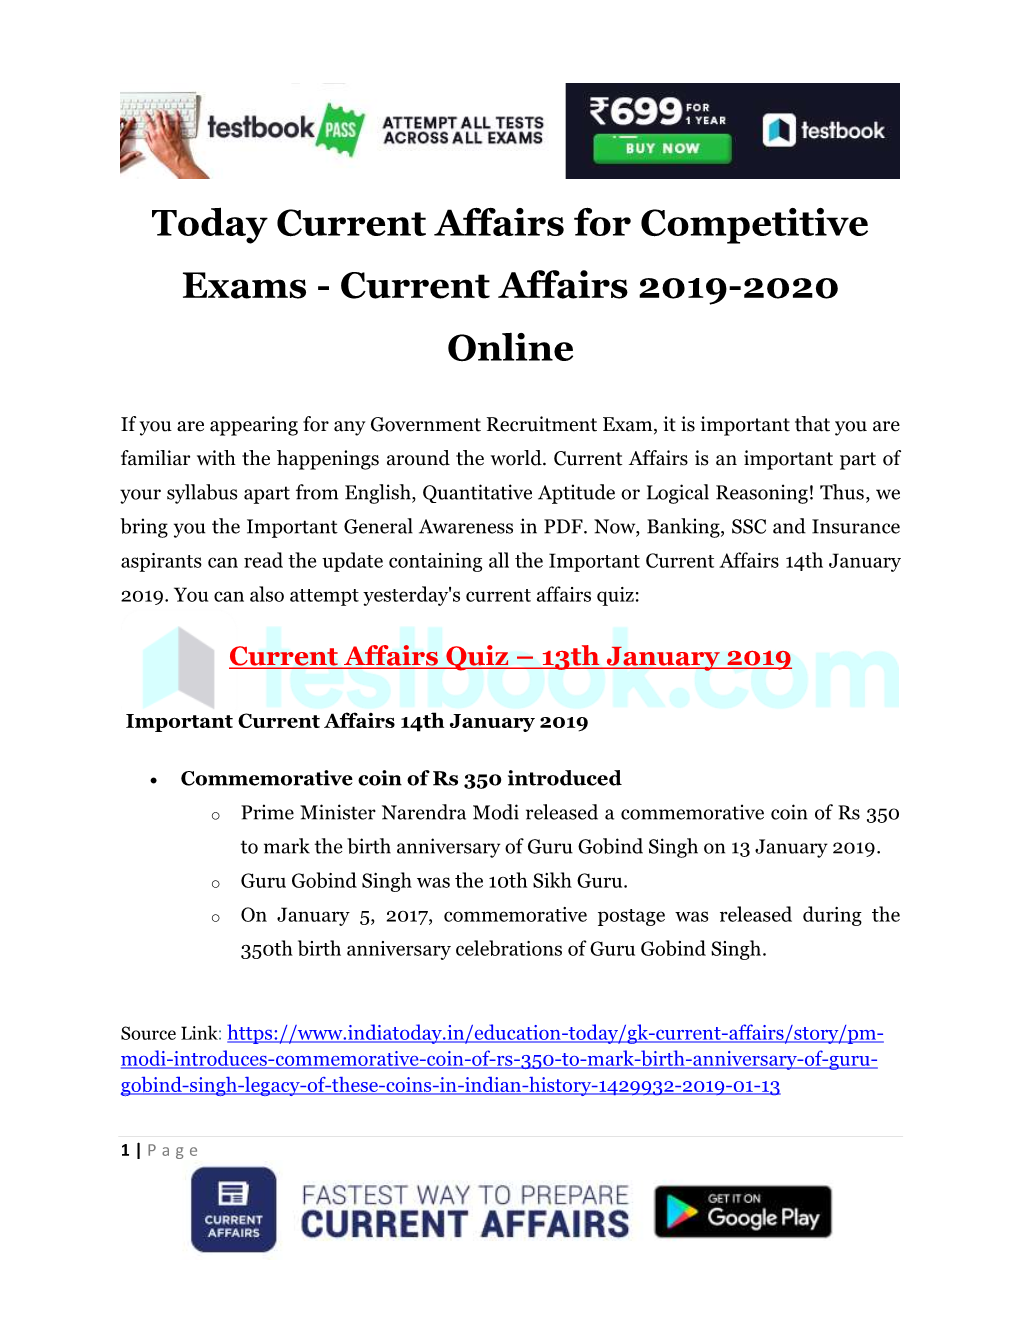 Today Current Affairs for Competitive Exams - Current Affairs 2019-2020 Online